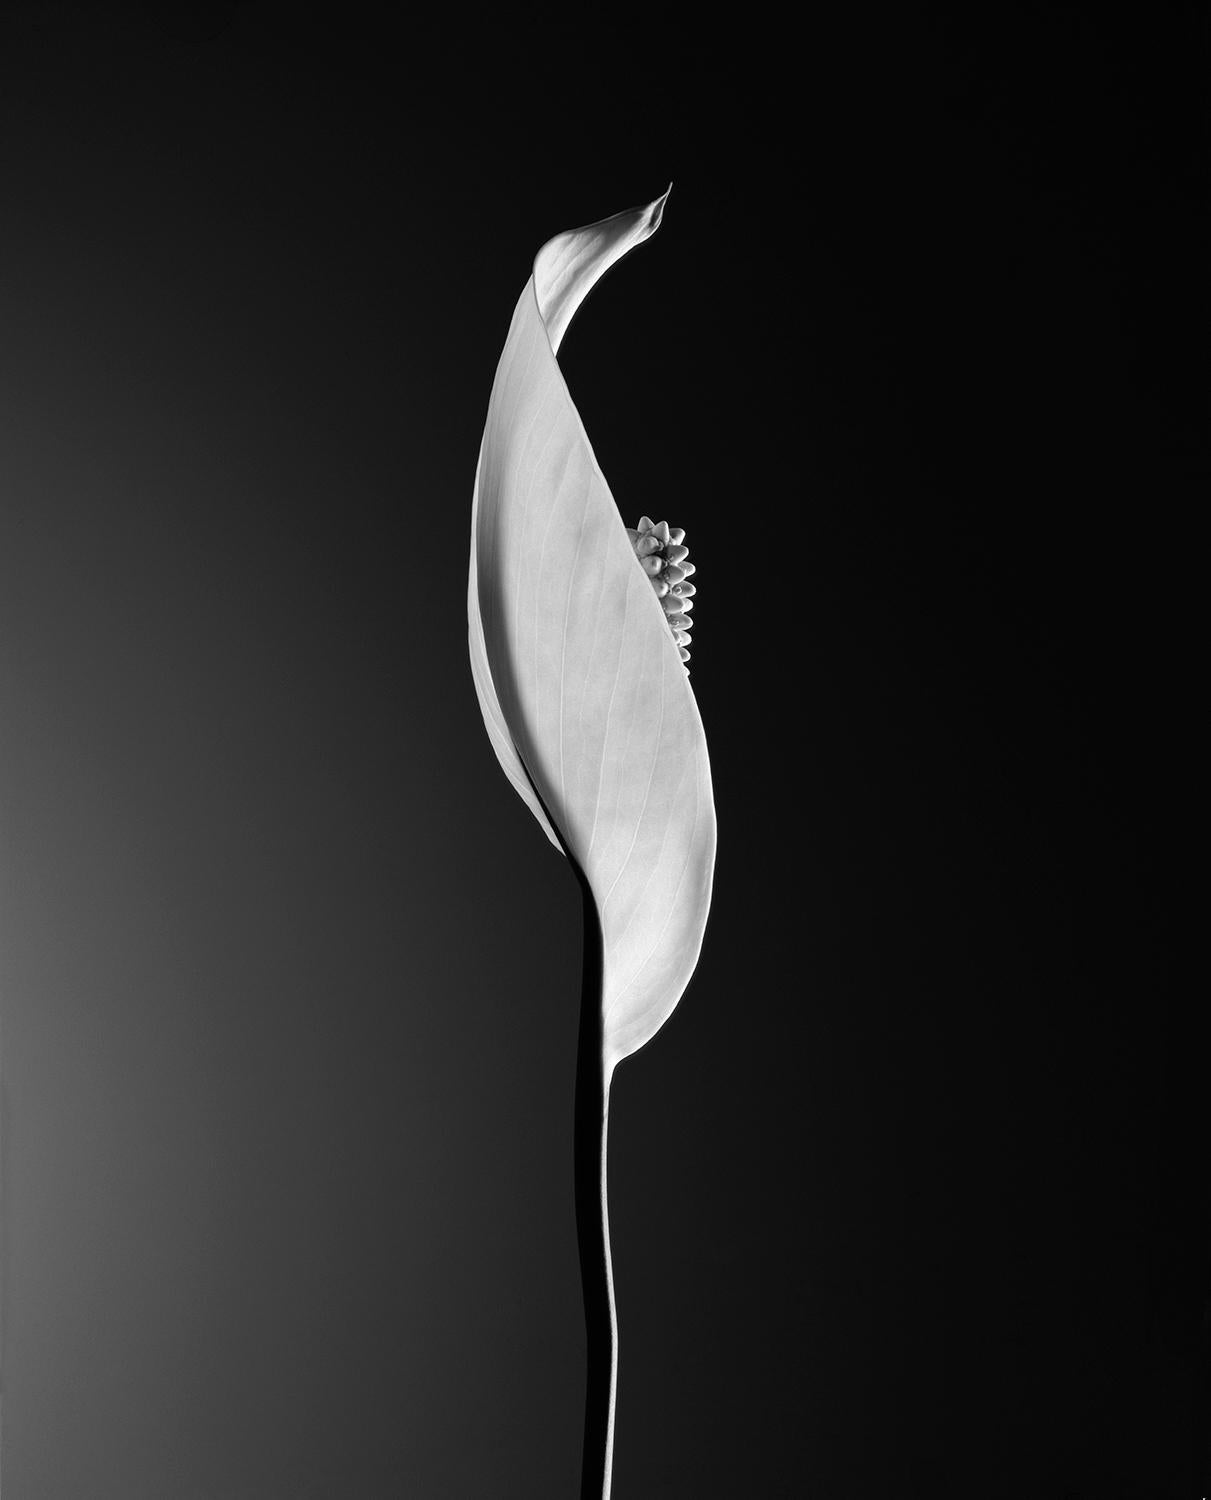 Edition of 25
signed and numbered by the artist

This still-life picture of the flower "Calla" was shot on analog 4x5 inch film in the 80s.

JJK is a pseudonym for one of the world's most successful photo artists.
In his series "Always in my mind",